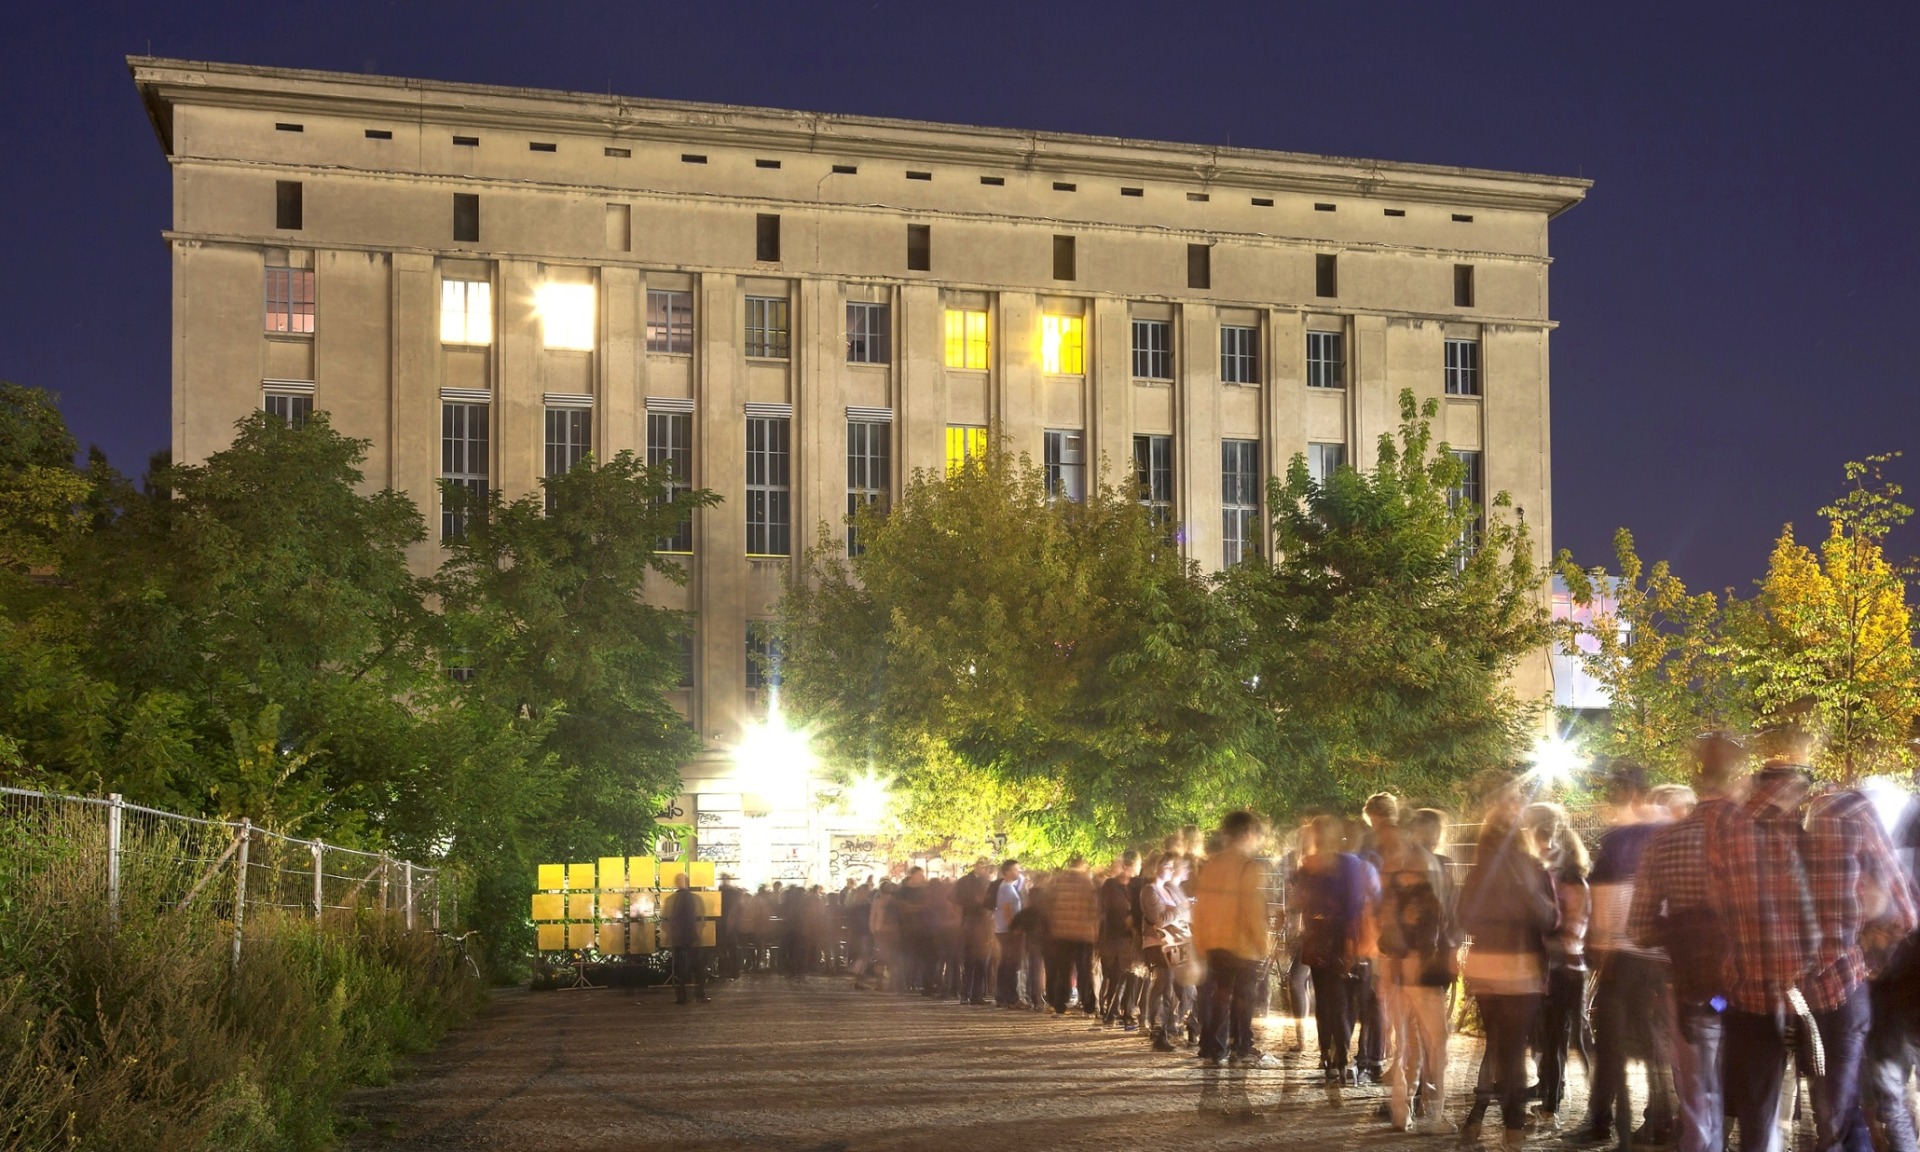 Berghain. Mandatory Credit: Photo by Image Broker/REX (2227351a) Berghain Club with queue, Berlin, Germany VARIOUS